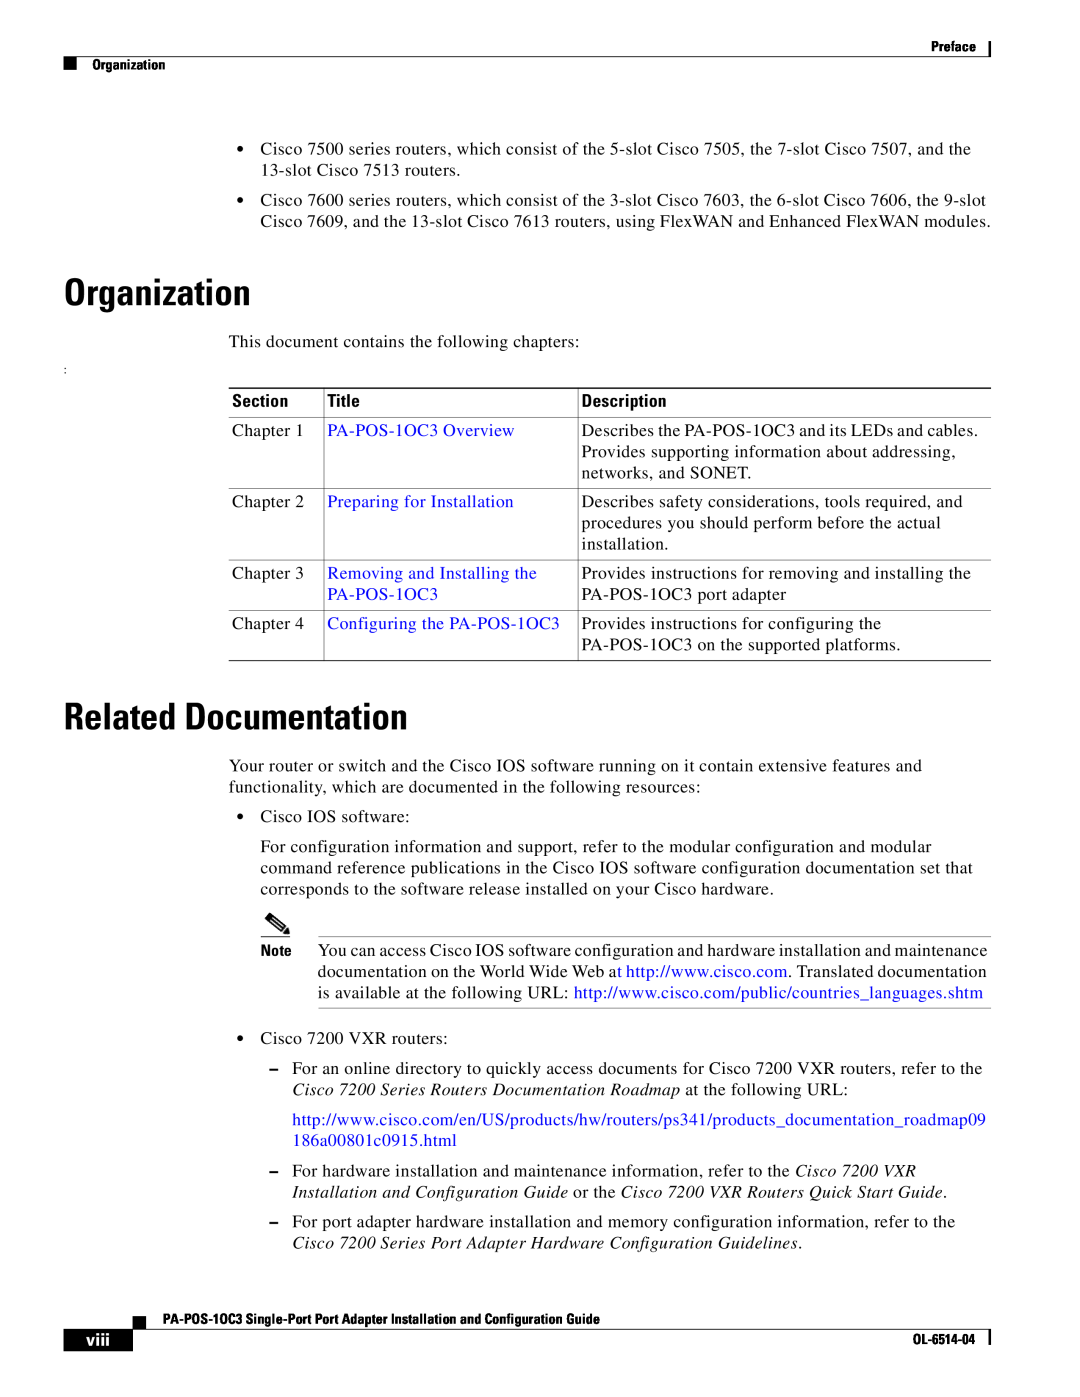 Cisco Systems PA-POS-2OC3 Organization, Related Documentation, Section, Title, Description, PA-POS-1OC3 Overview, viii 